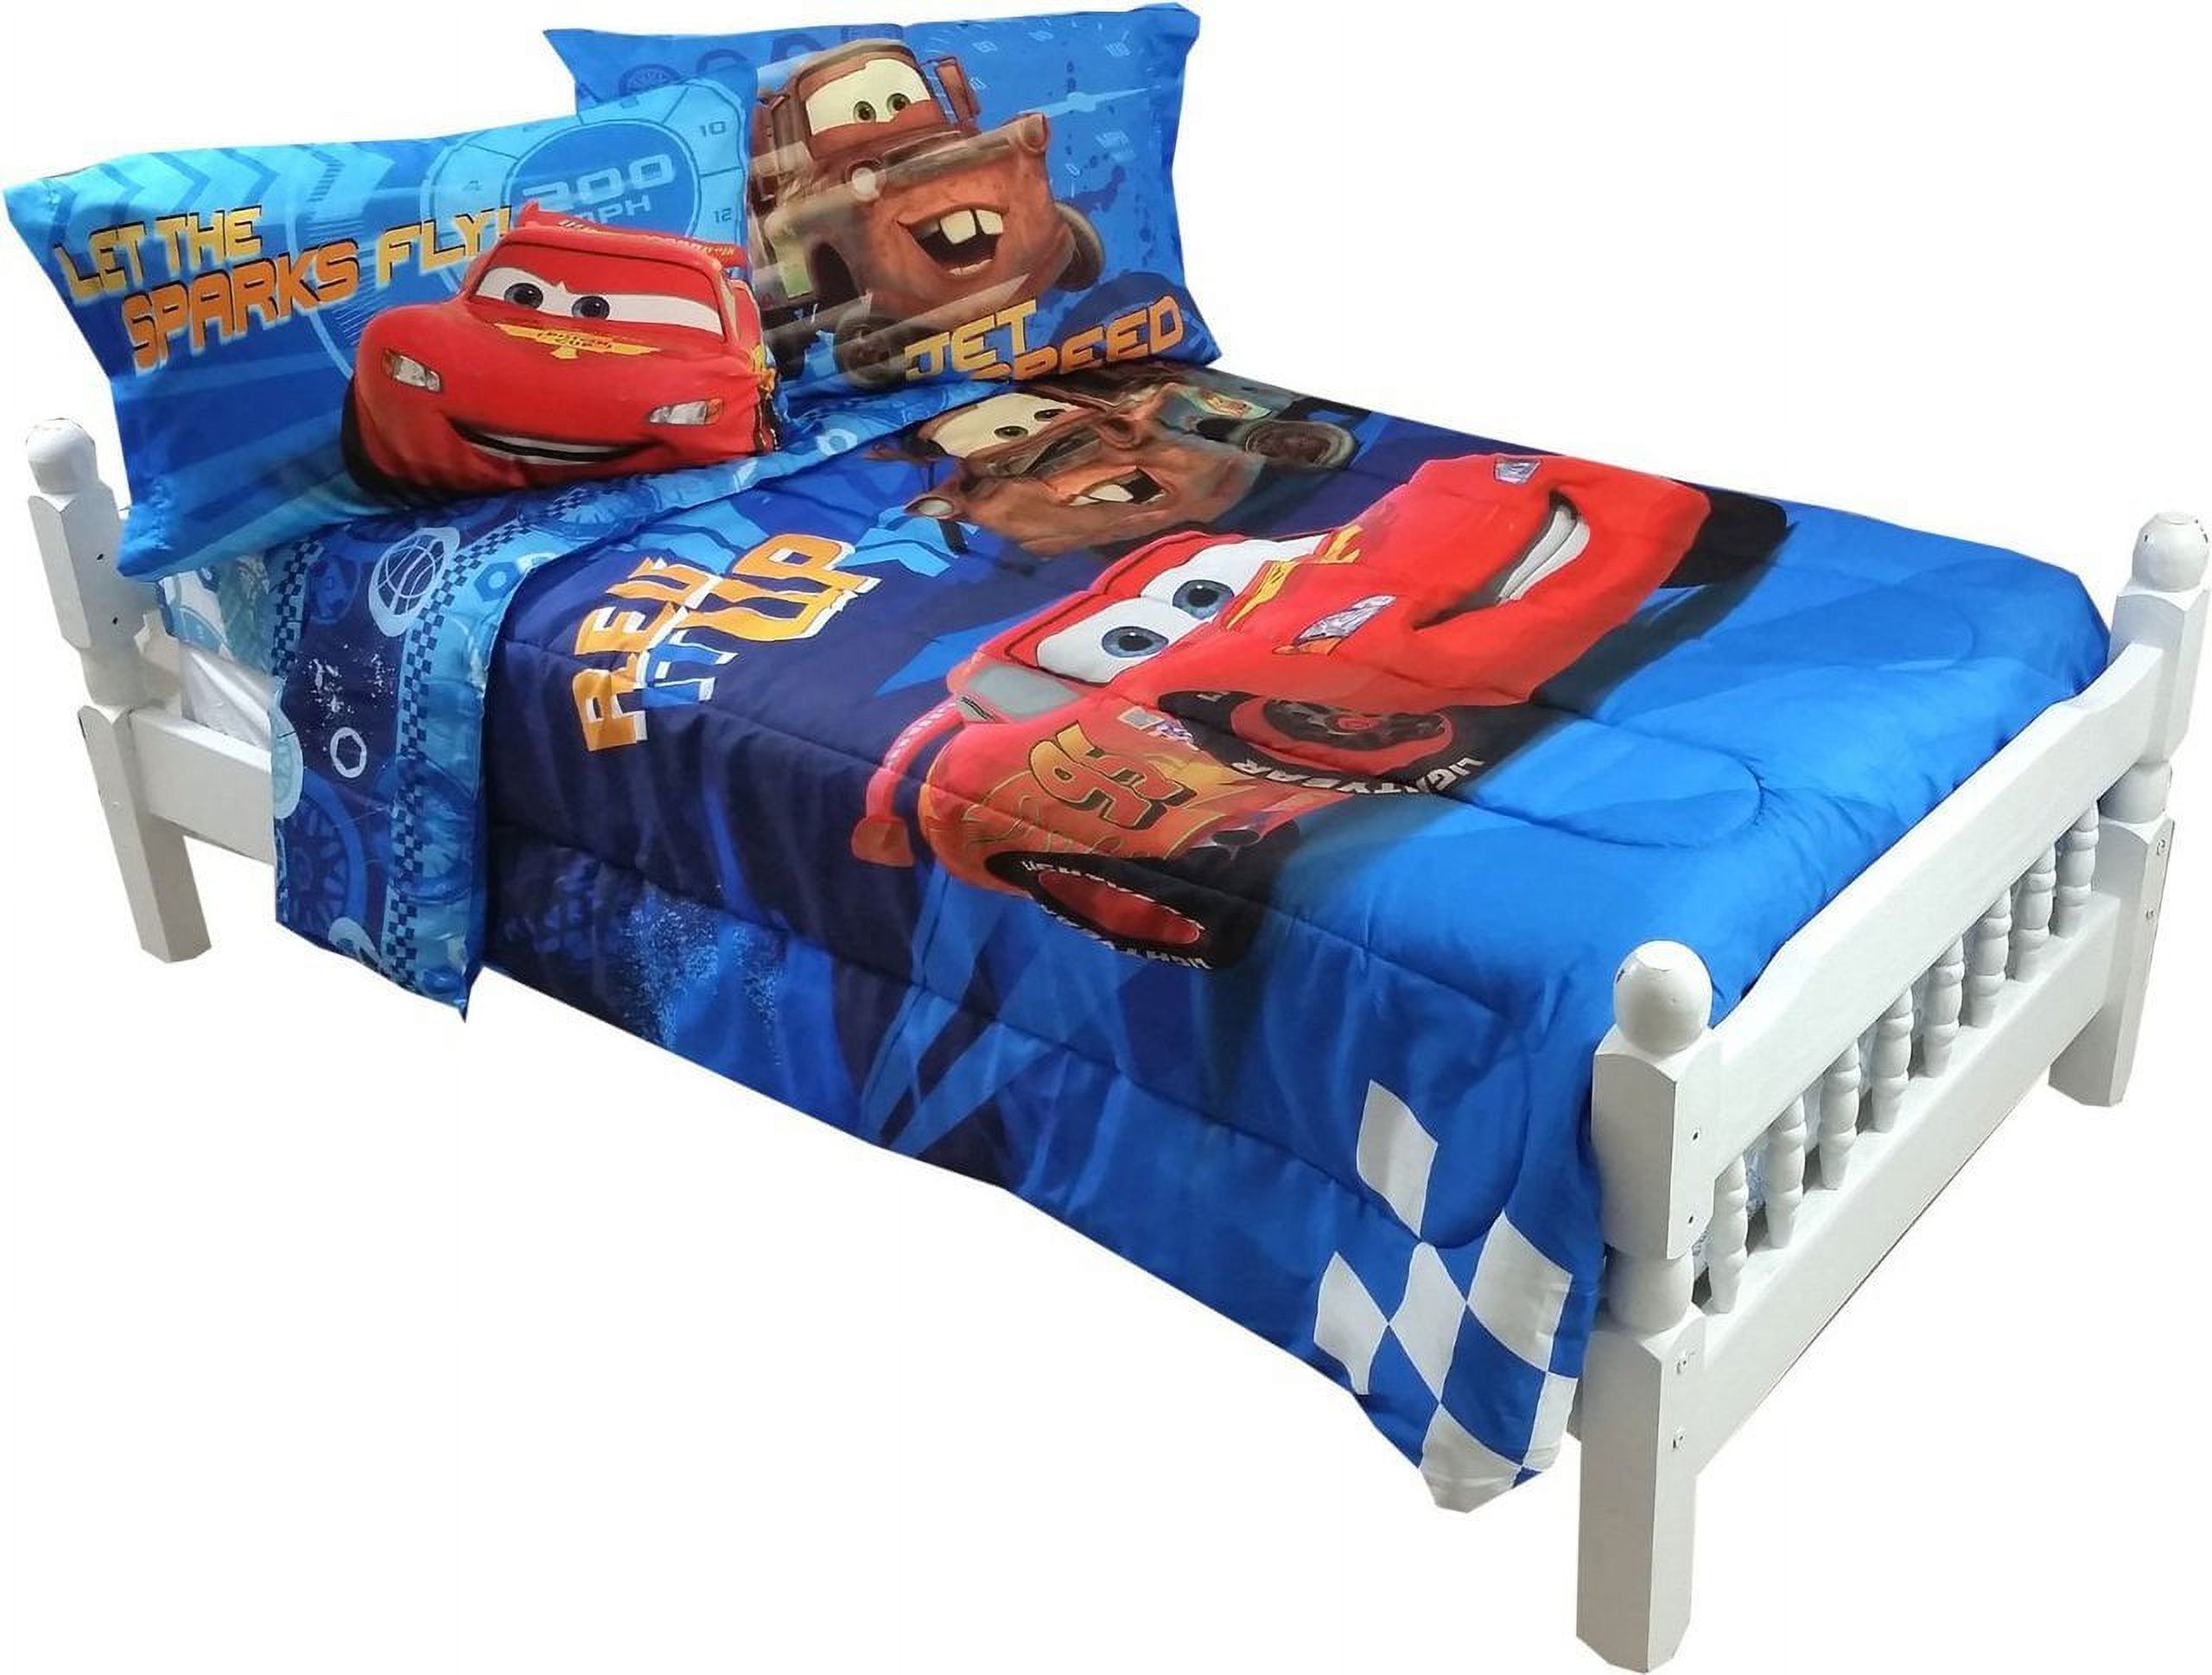 Disney Cars 2 Twin or Full Comforter, 1 Each - image 2 of 2